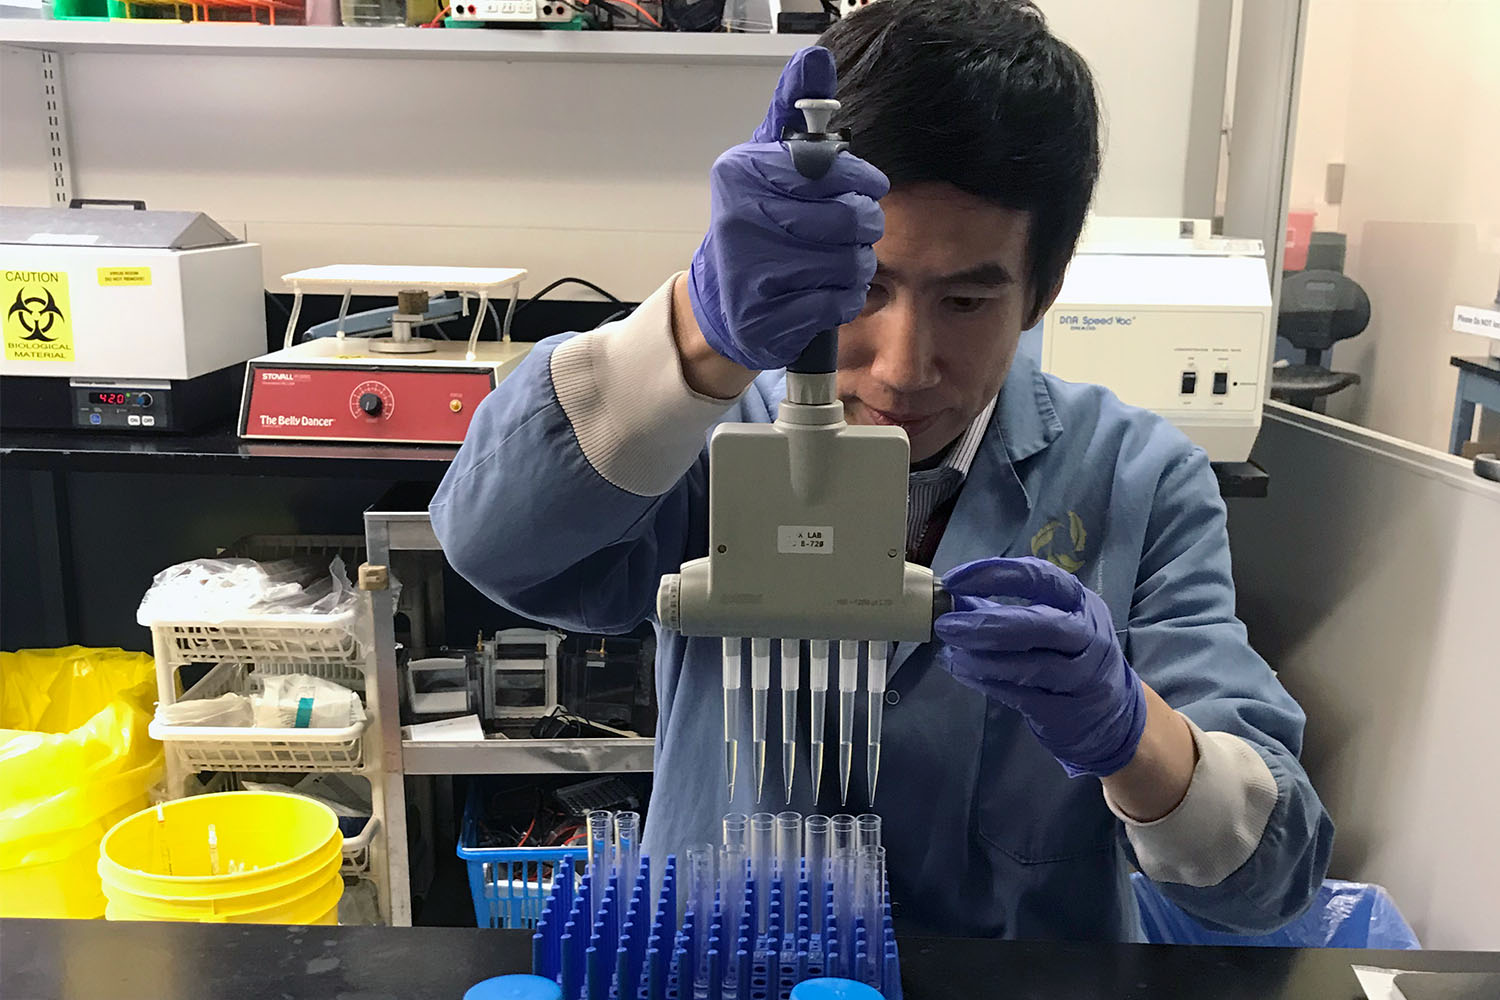 Chunxing Zheng, Ph.D., a CRI Postdoctoral Fellow in the lab of Tak W. Mak, Ph.D., at the University Health Network in Toronto, Canada, is studying how a distinct subset of helper T cells that produce acetylcholine contributes to the development of colorectal cancer.